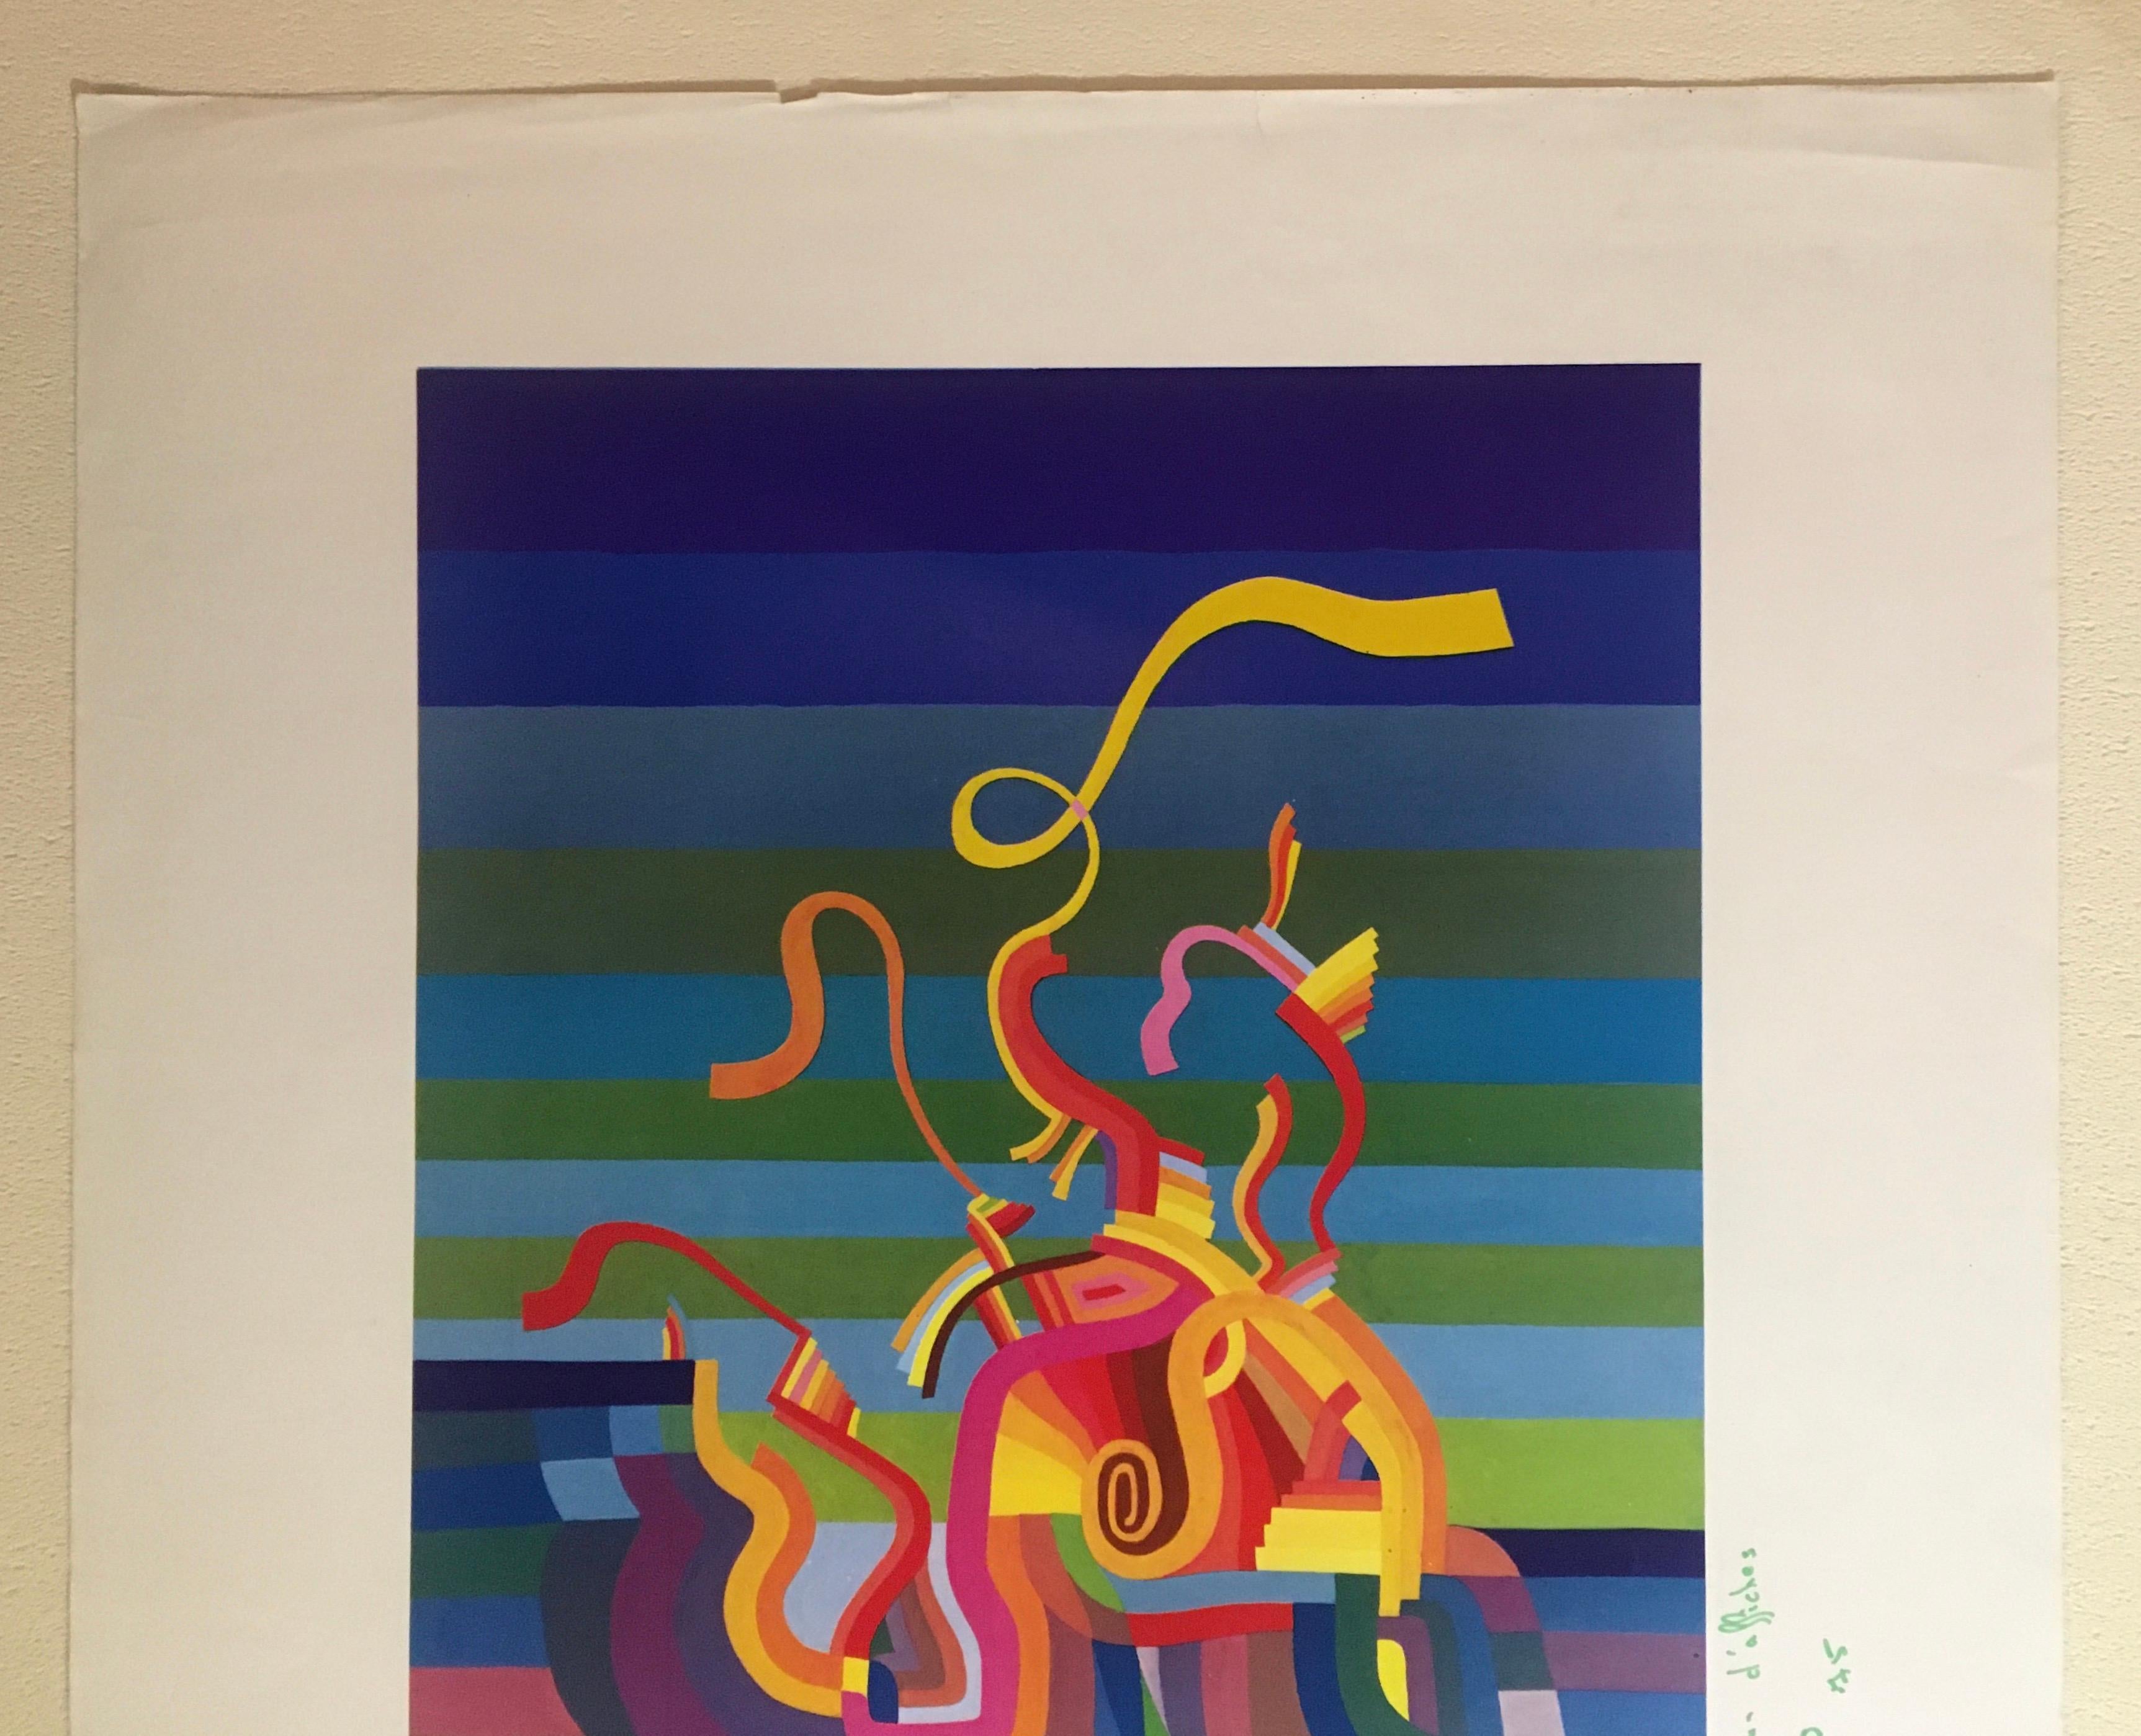 Original midcentury abstract art exhibition poster with wonderful vivid colors.
Very decorative contemporary art. 

Measures: 18